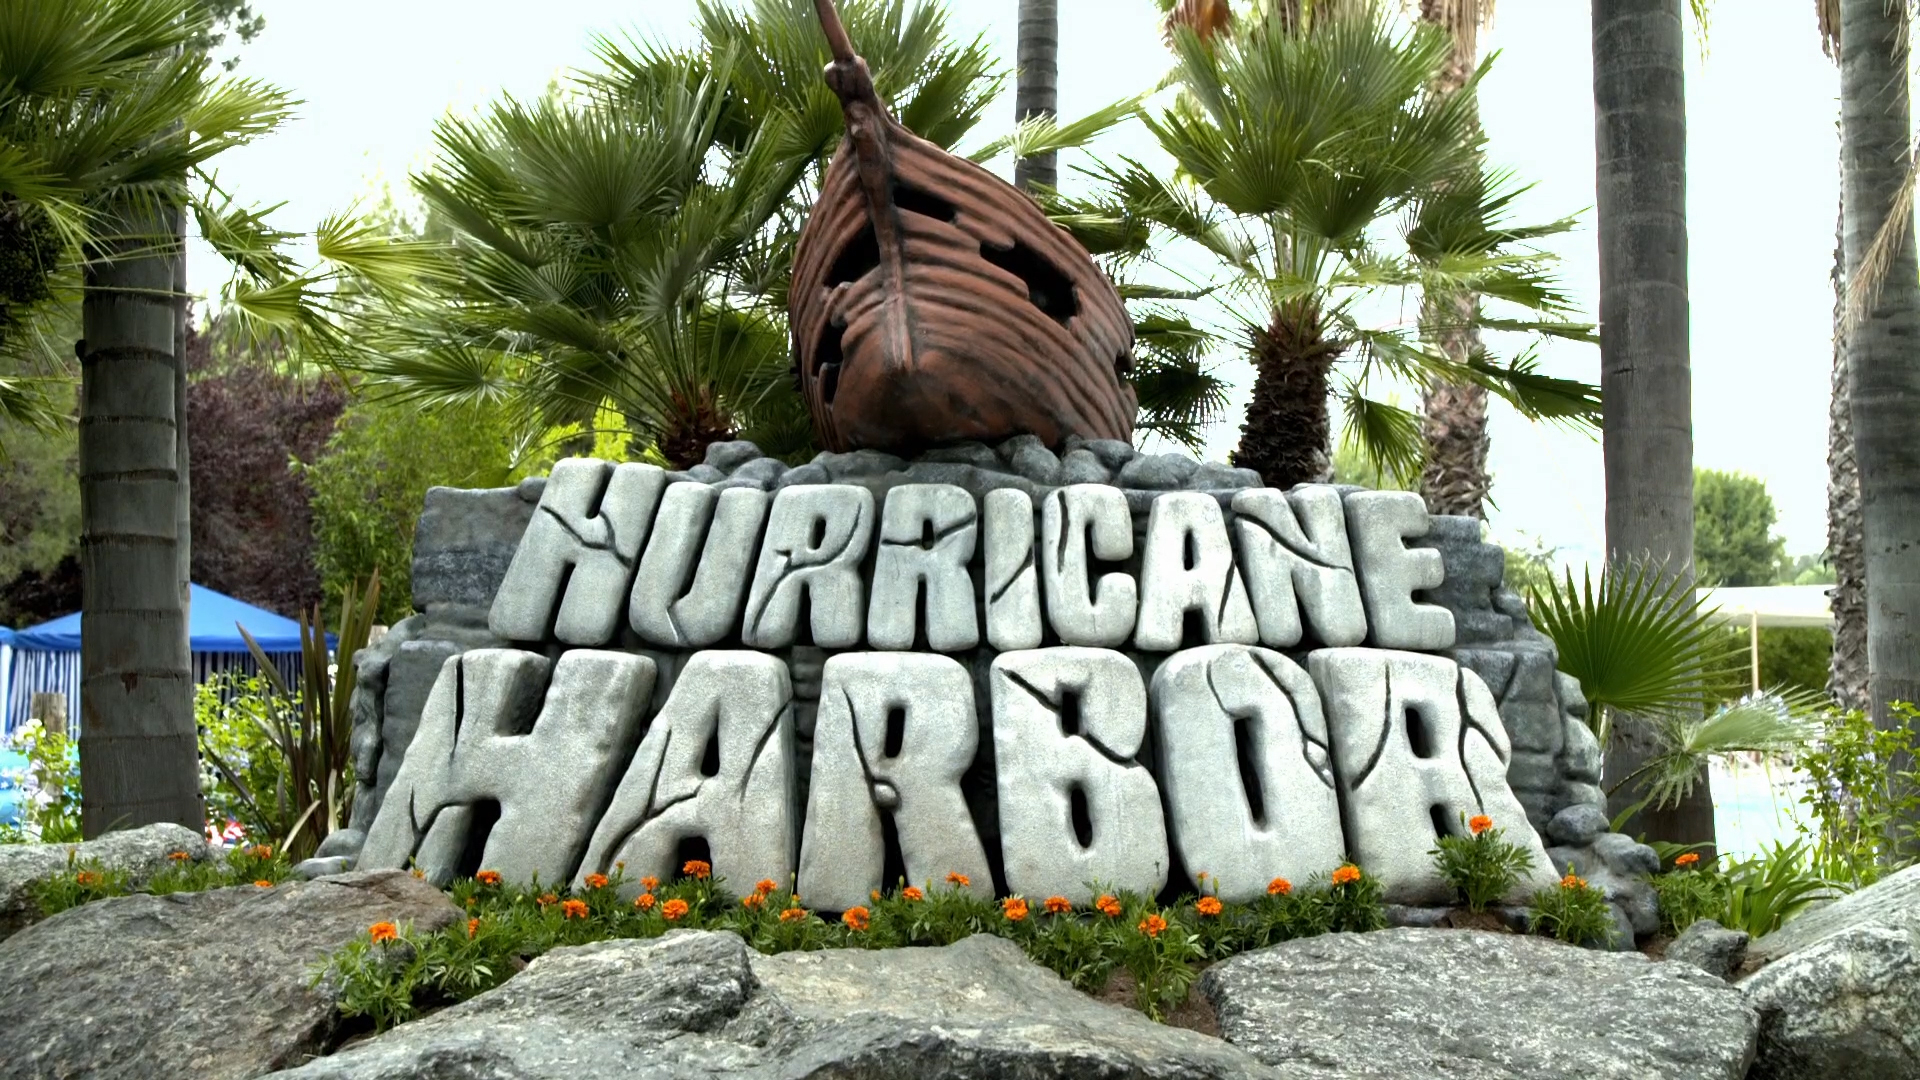 Six Flags Hurricane Harbor Los Angeles splashes into summer with something for all ages from thrilling speed slides and relaxing water attractions to family splash areas and premium cabanas.